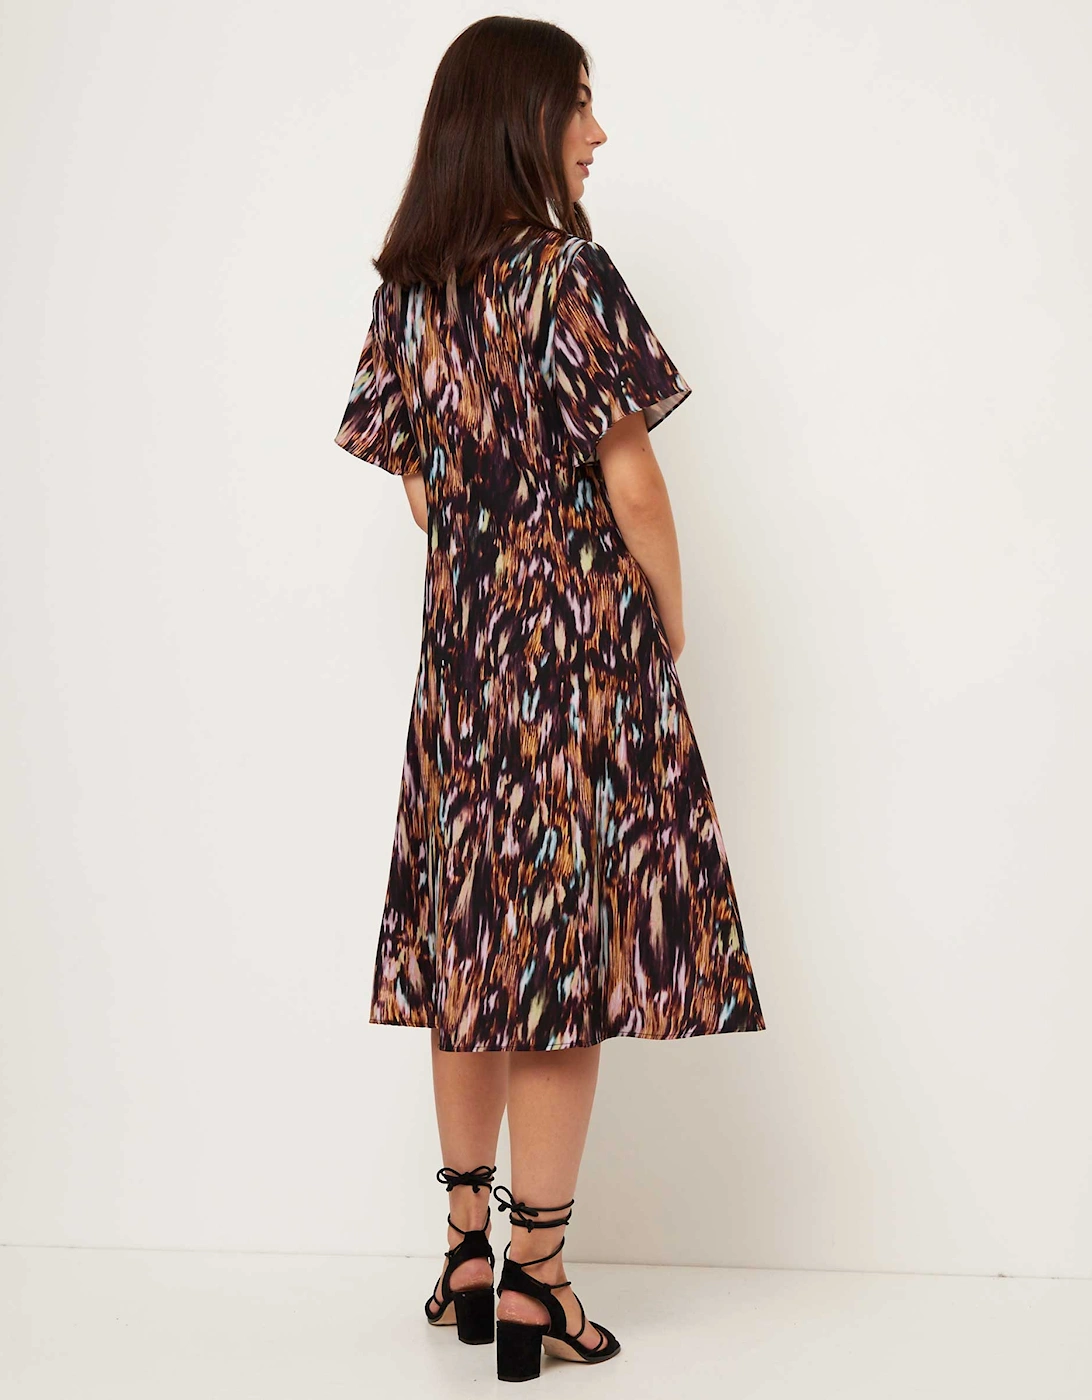 Abstract Floral Dress